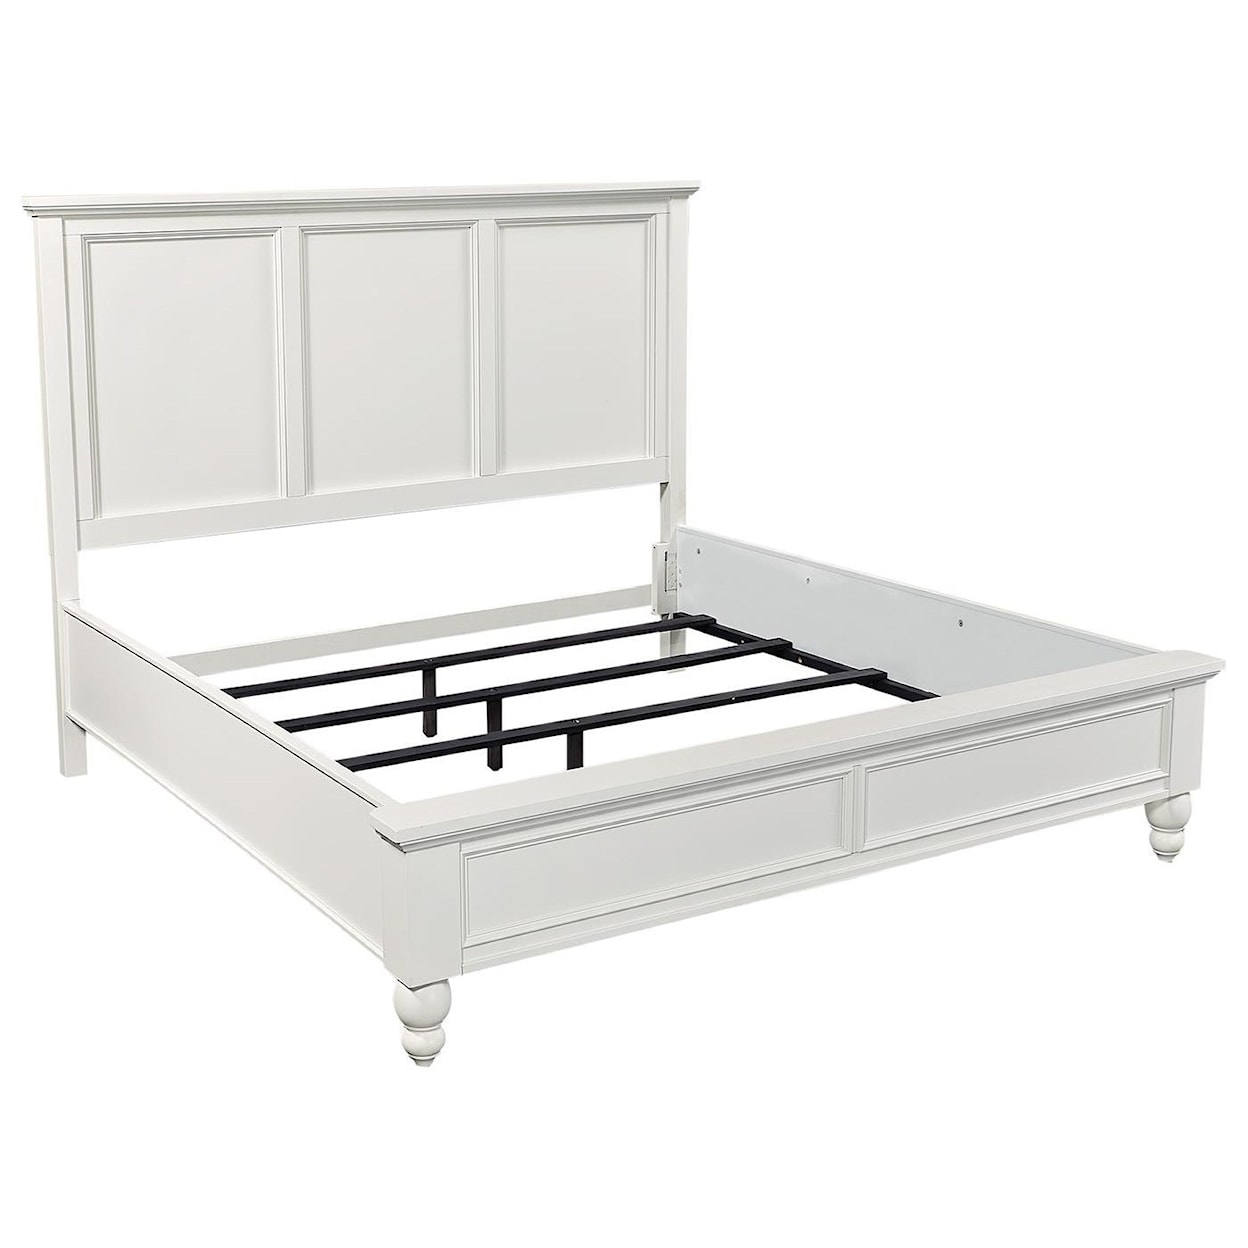 Aspenhome Cambridge CHY King Panel Bed